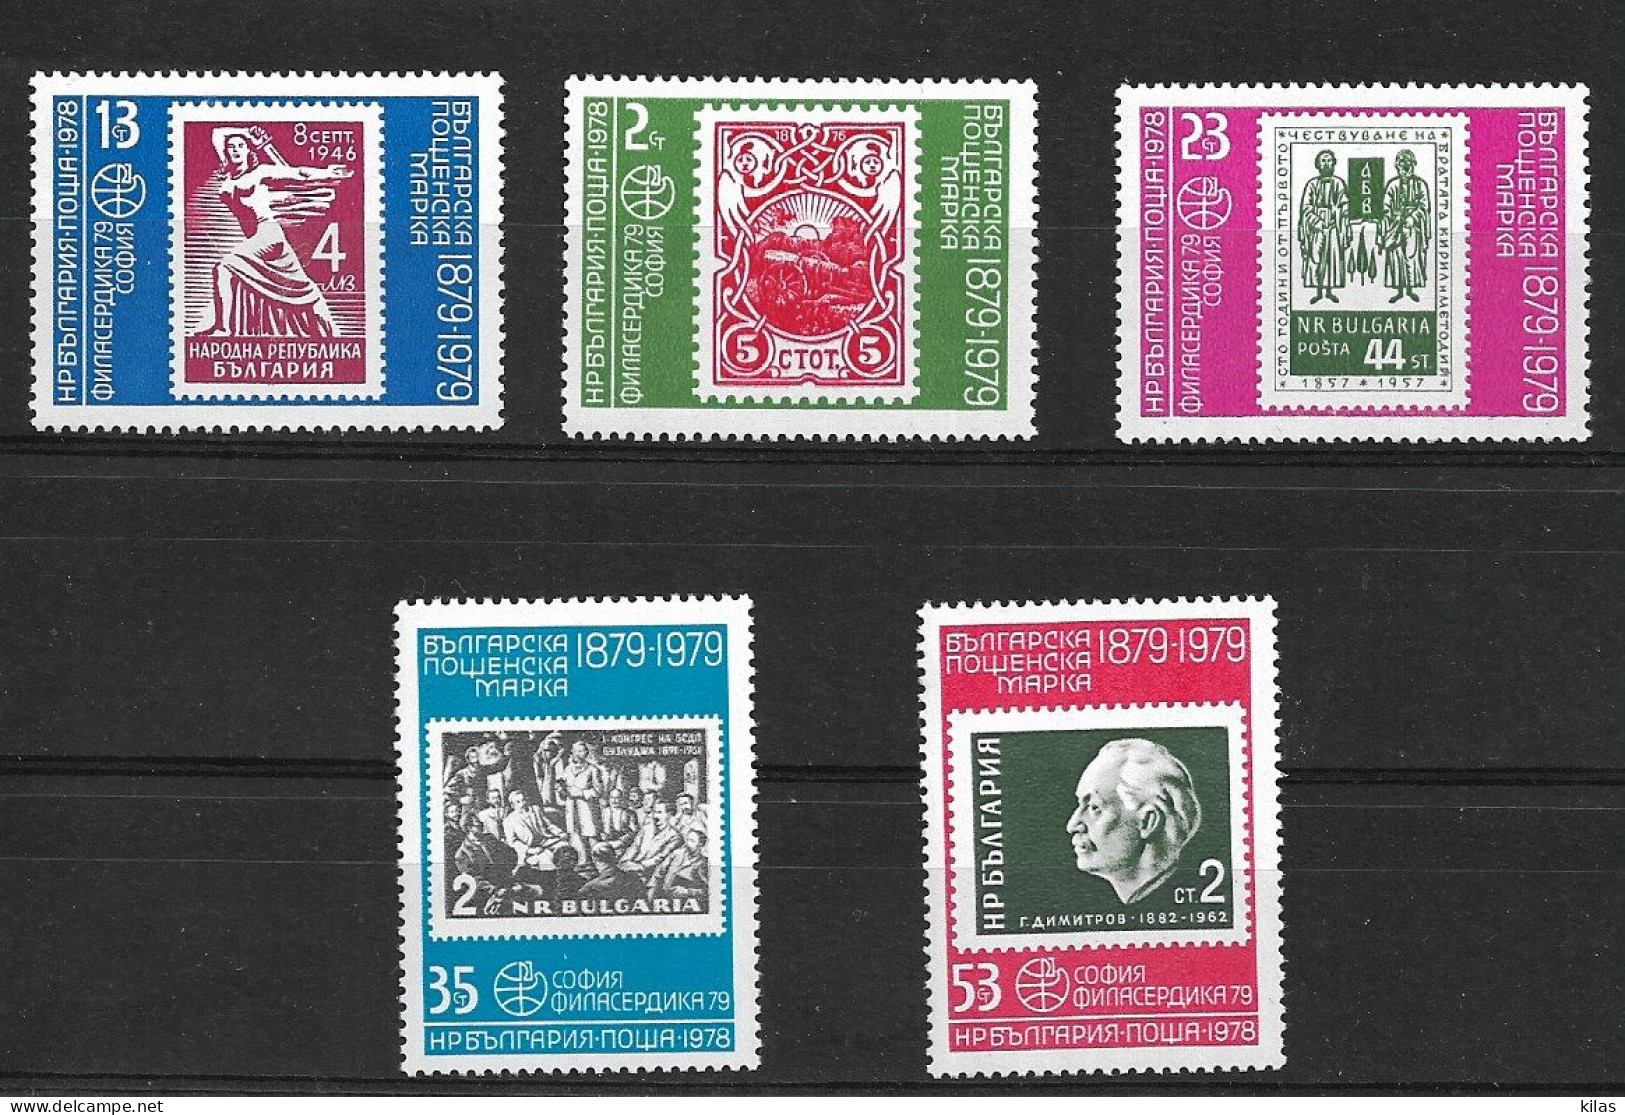 BULGARIA 1978 CENTENNIAL OF THE BULGARIAN STAMP MNH - Stamp's Day